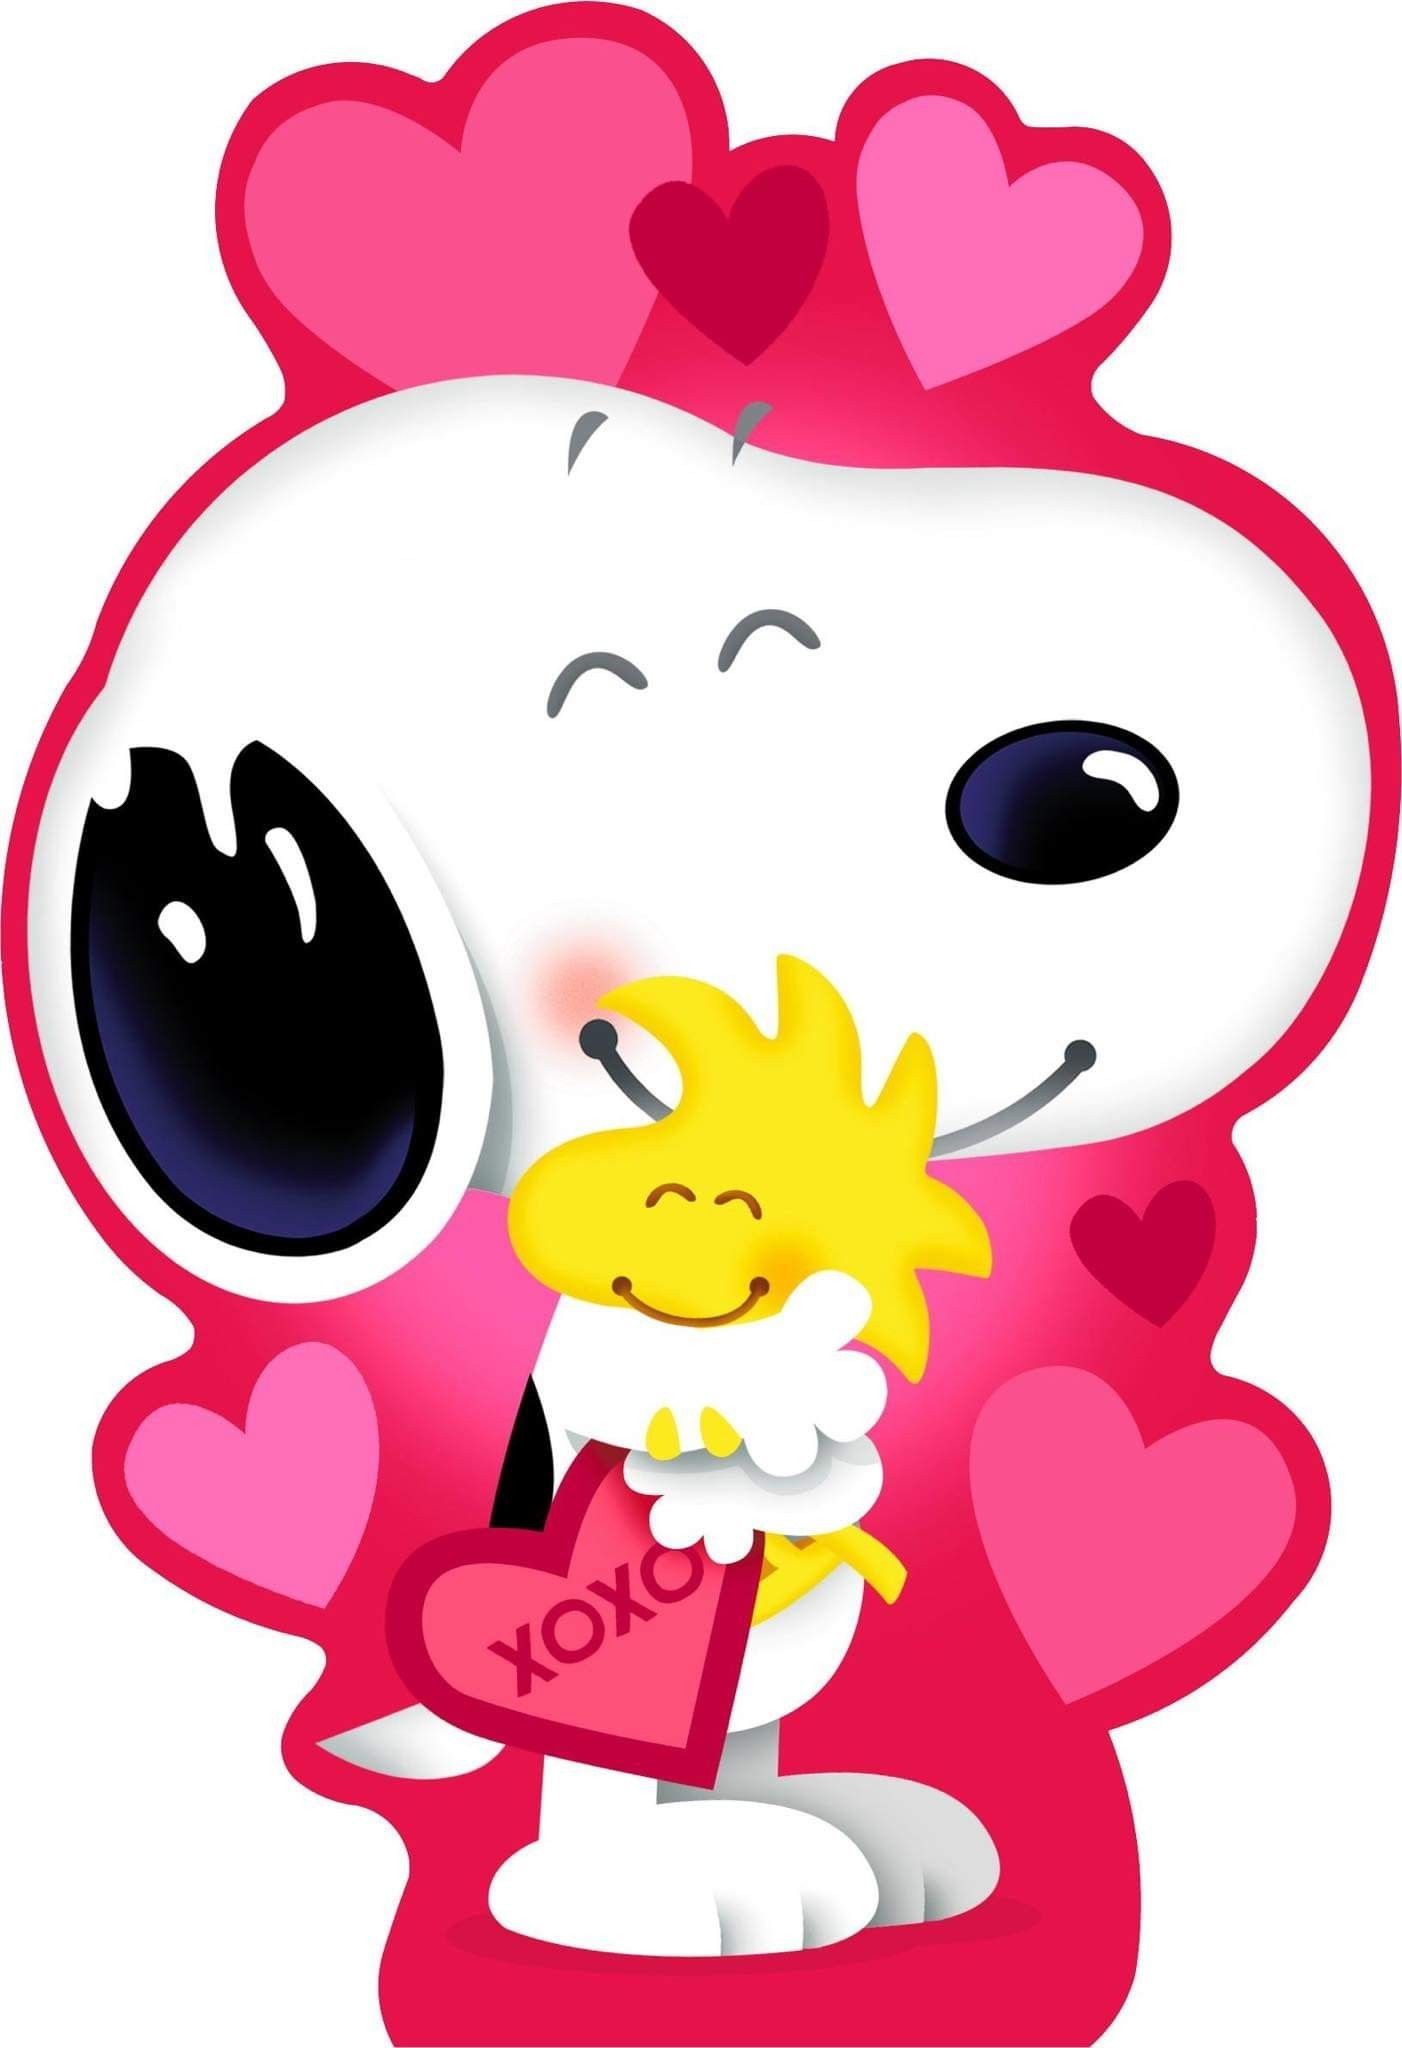 1402x2048 Snoopy Love, Snoopy And Woodstock, Snoopy Valentine's Day, Snoopy Hug,  Peanuts Comics